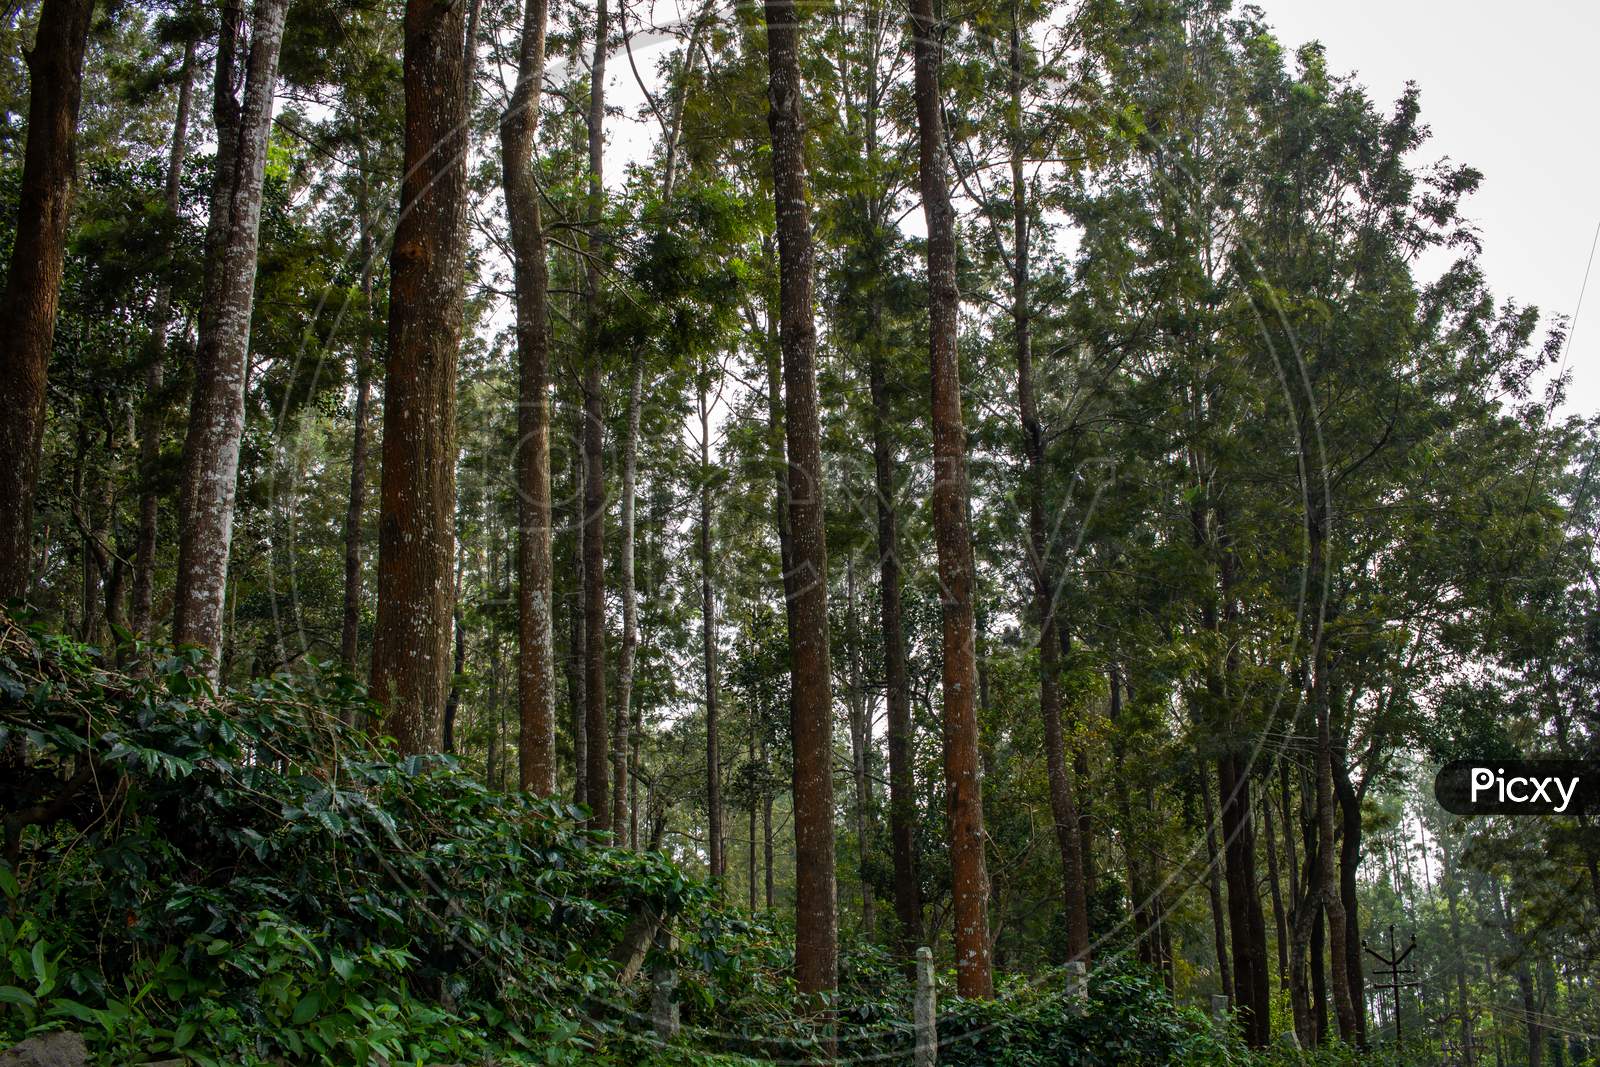 Scenic View Of The Trees Providing Shade To Coffee Plantations In Yercaud Hill Station, Tamil Nadu, India